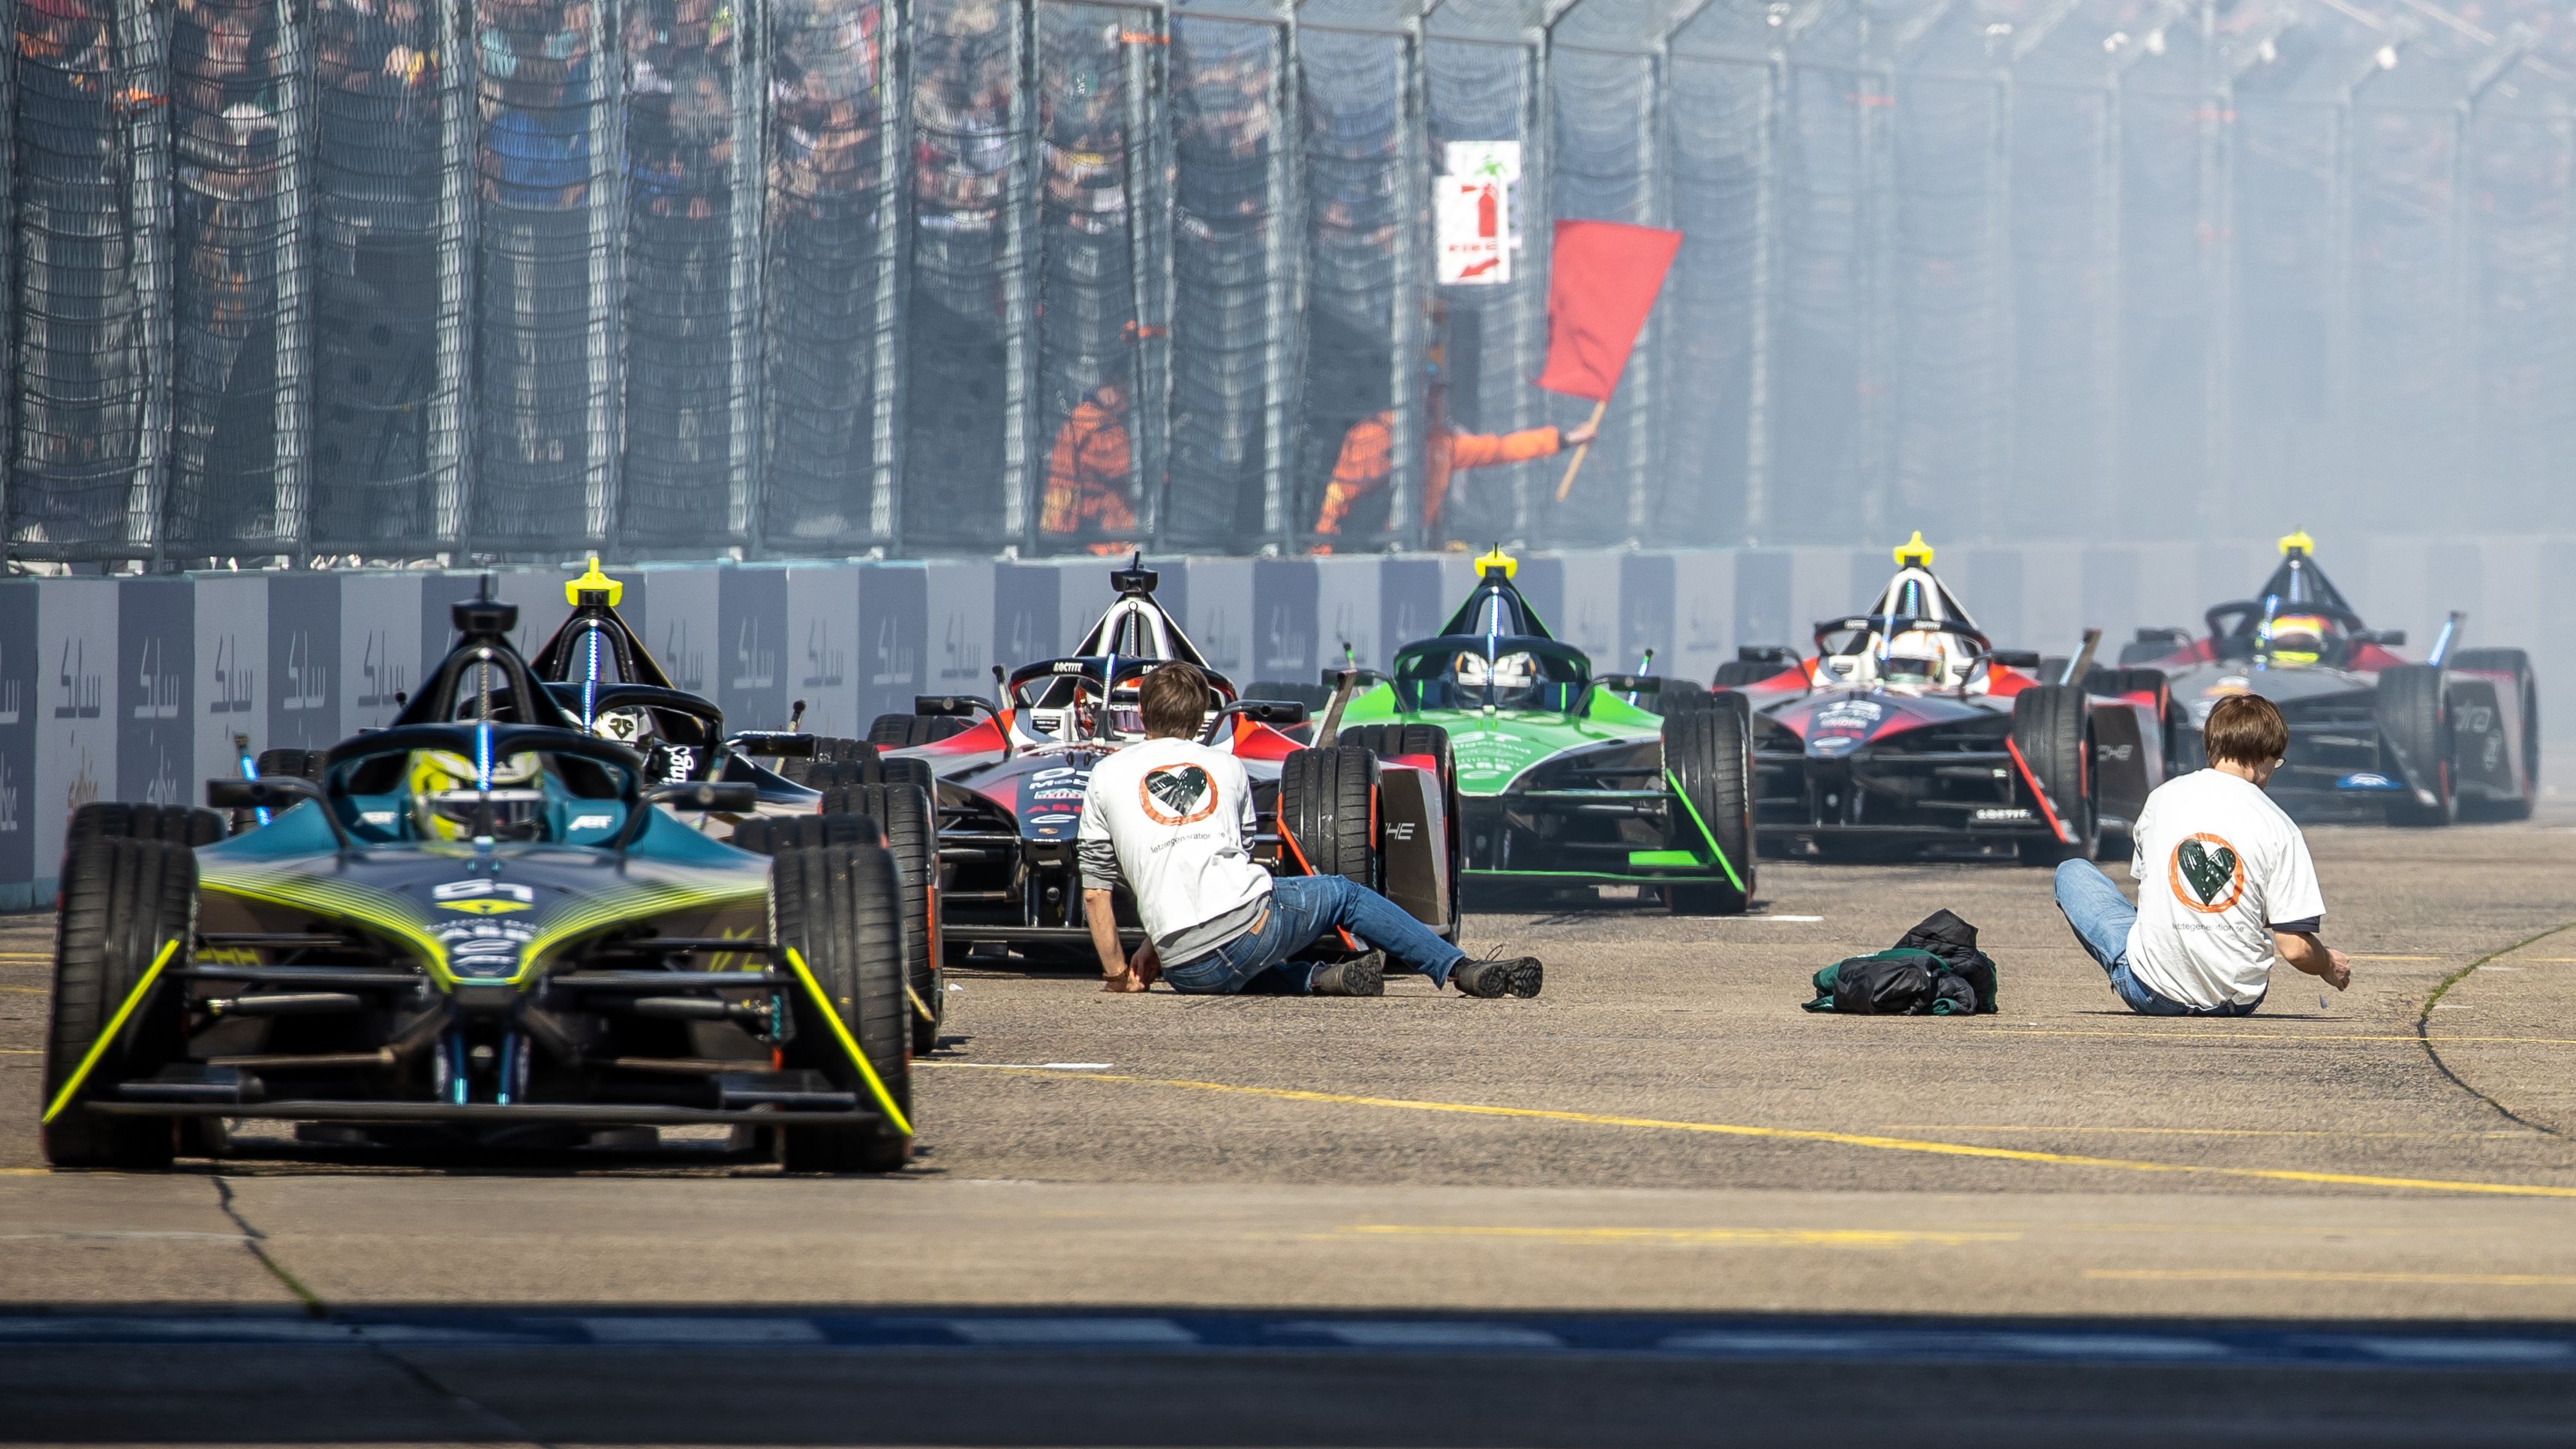 Last generation climate activists sit on the track in front of the Formula E race cars ready to start. Photo: Andreas Gora/dpa (Photo by Andreas Gora/picture alliance via Getty Images)